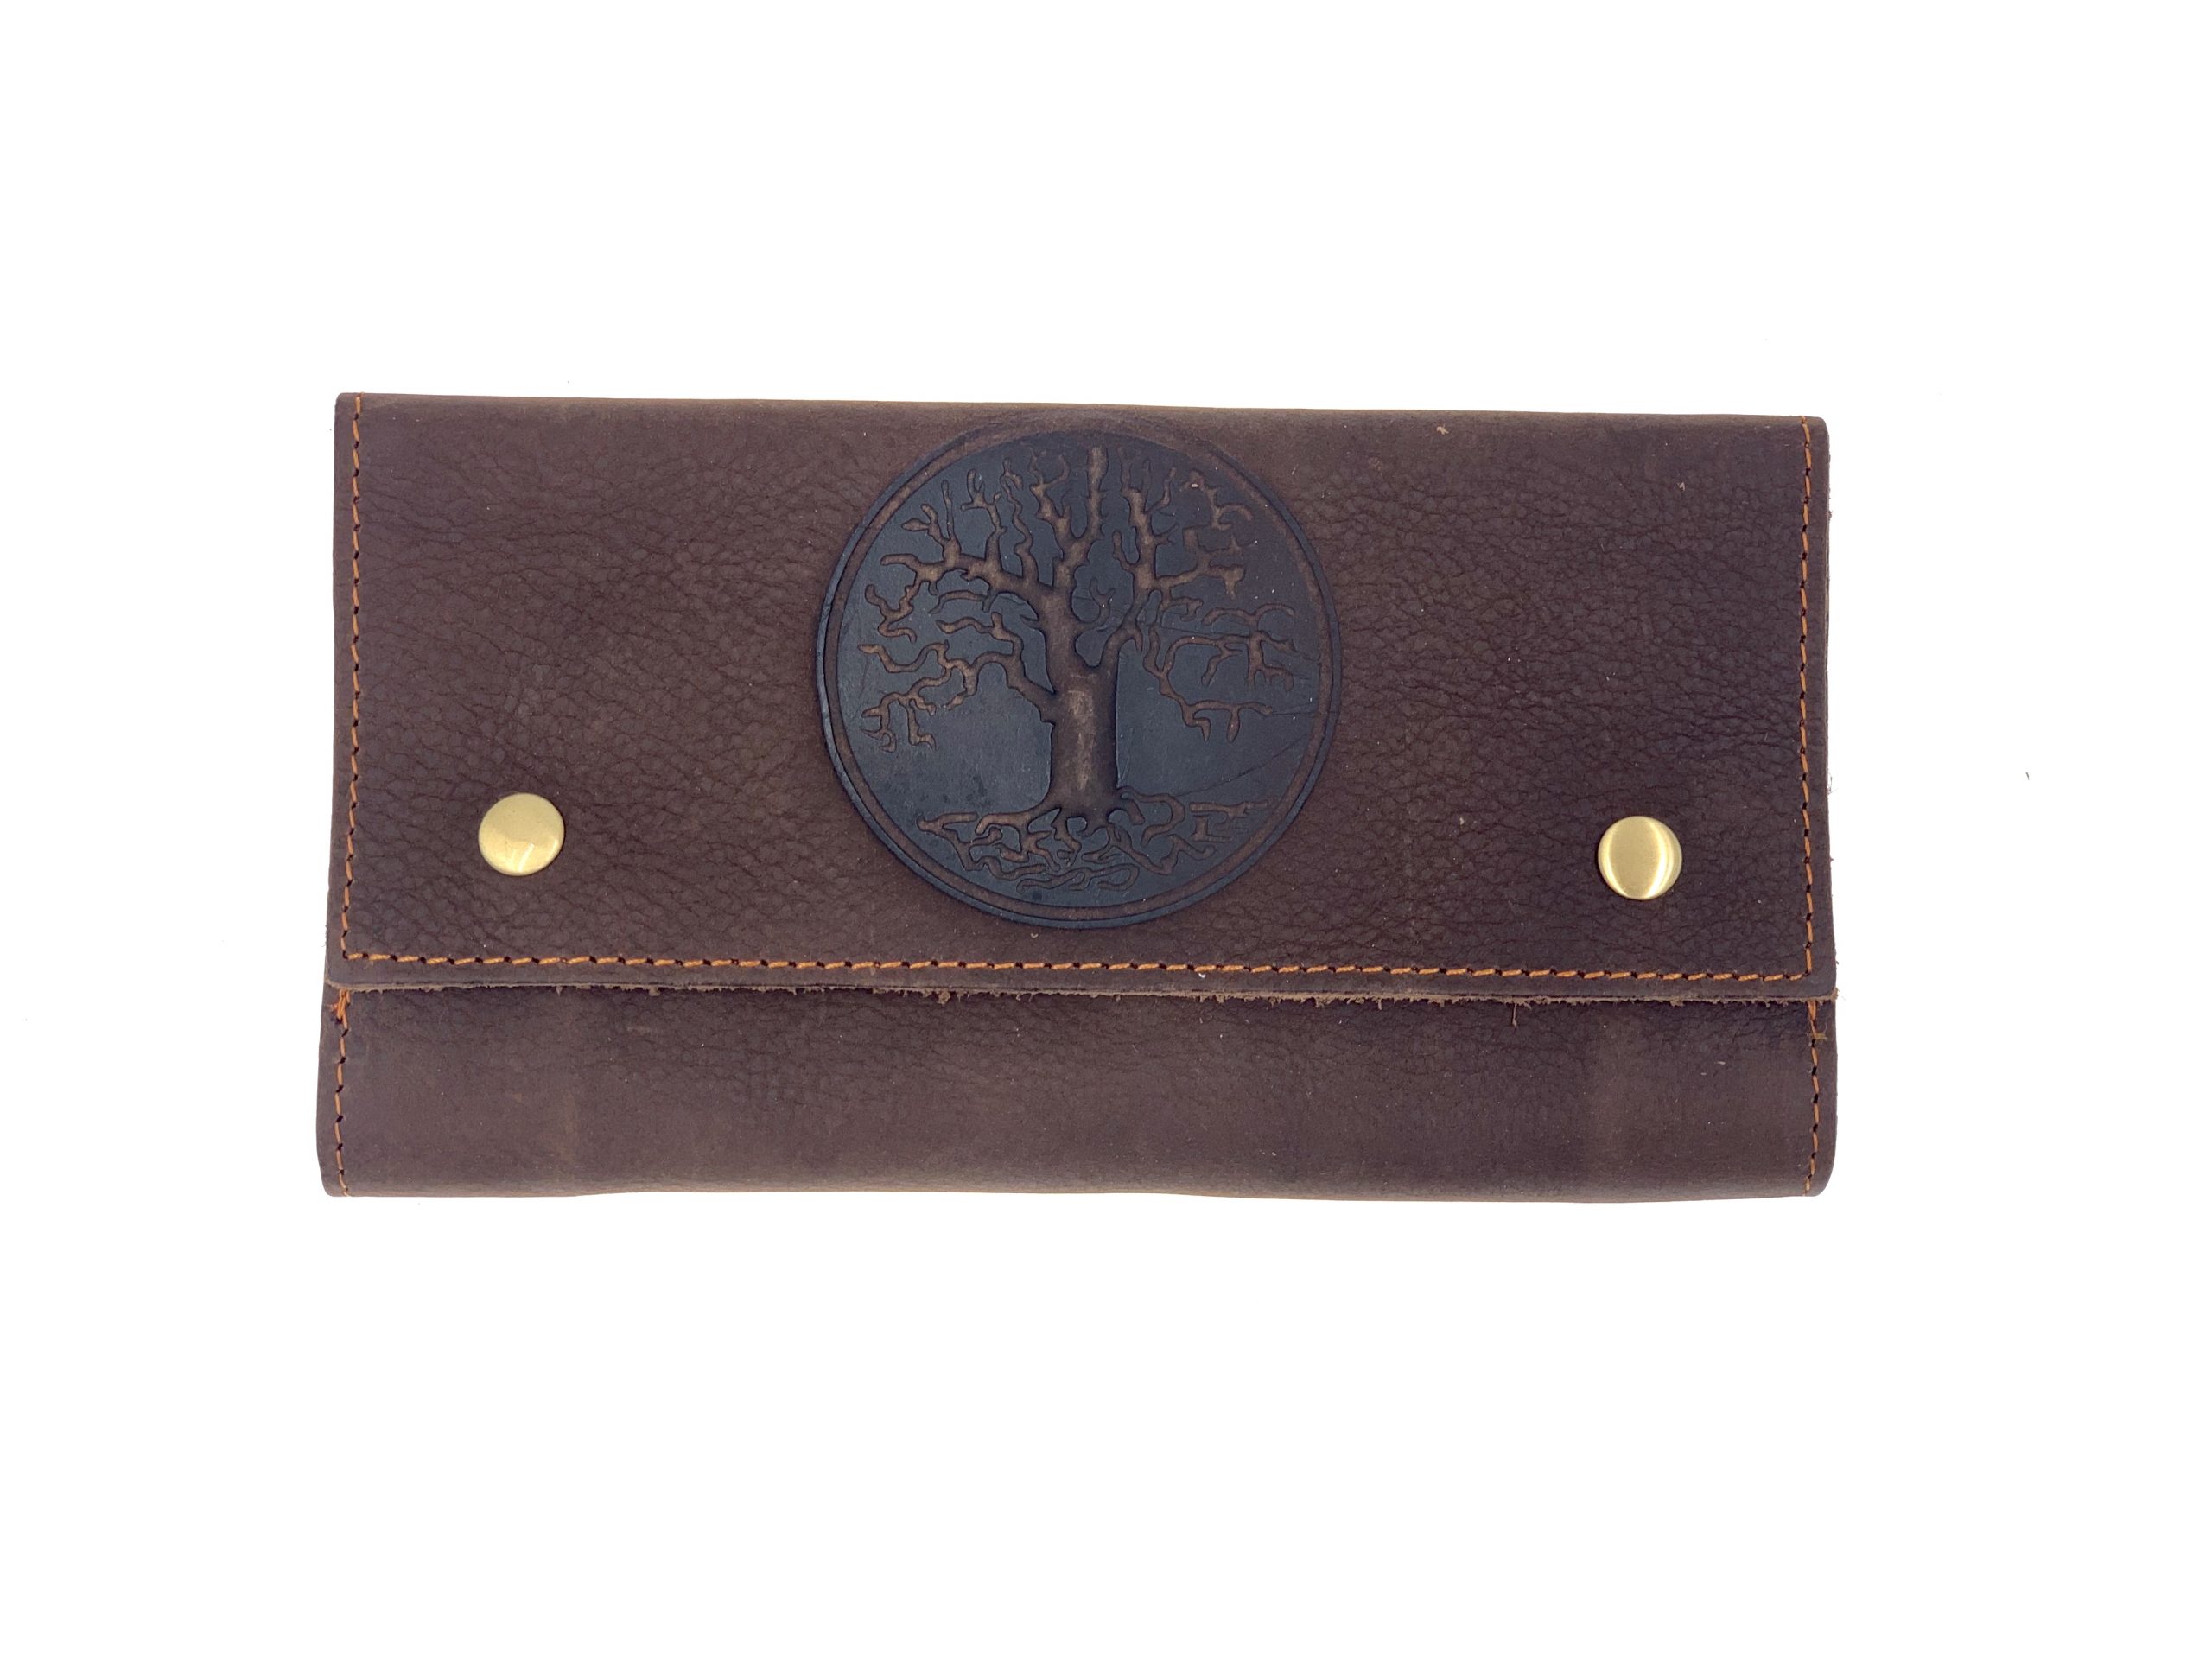 NATURES TREE OF LIFE COIN PURSE